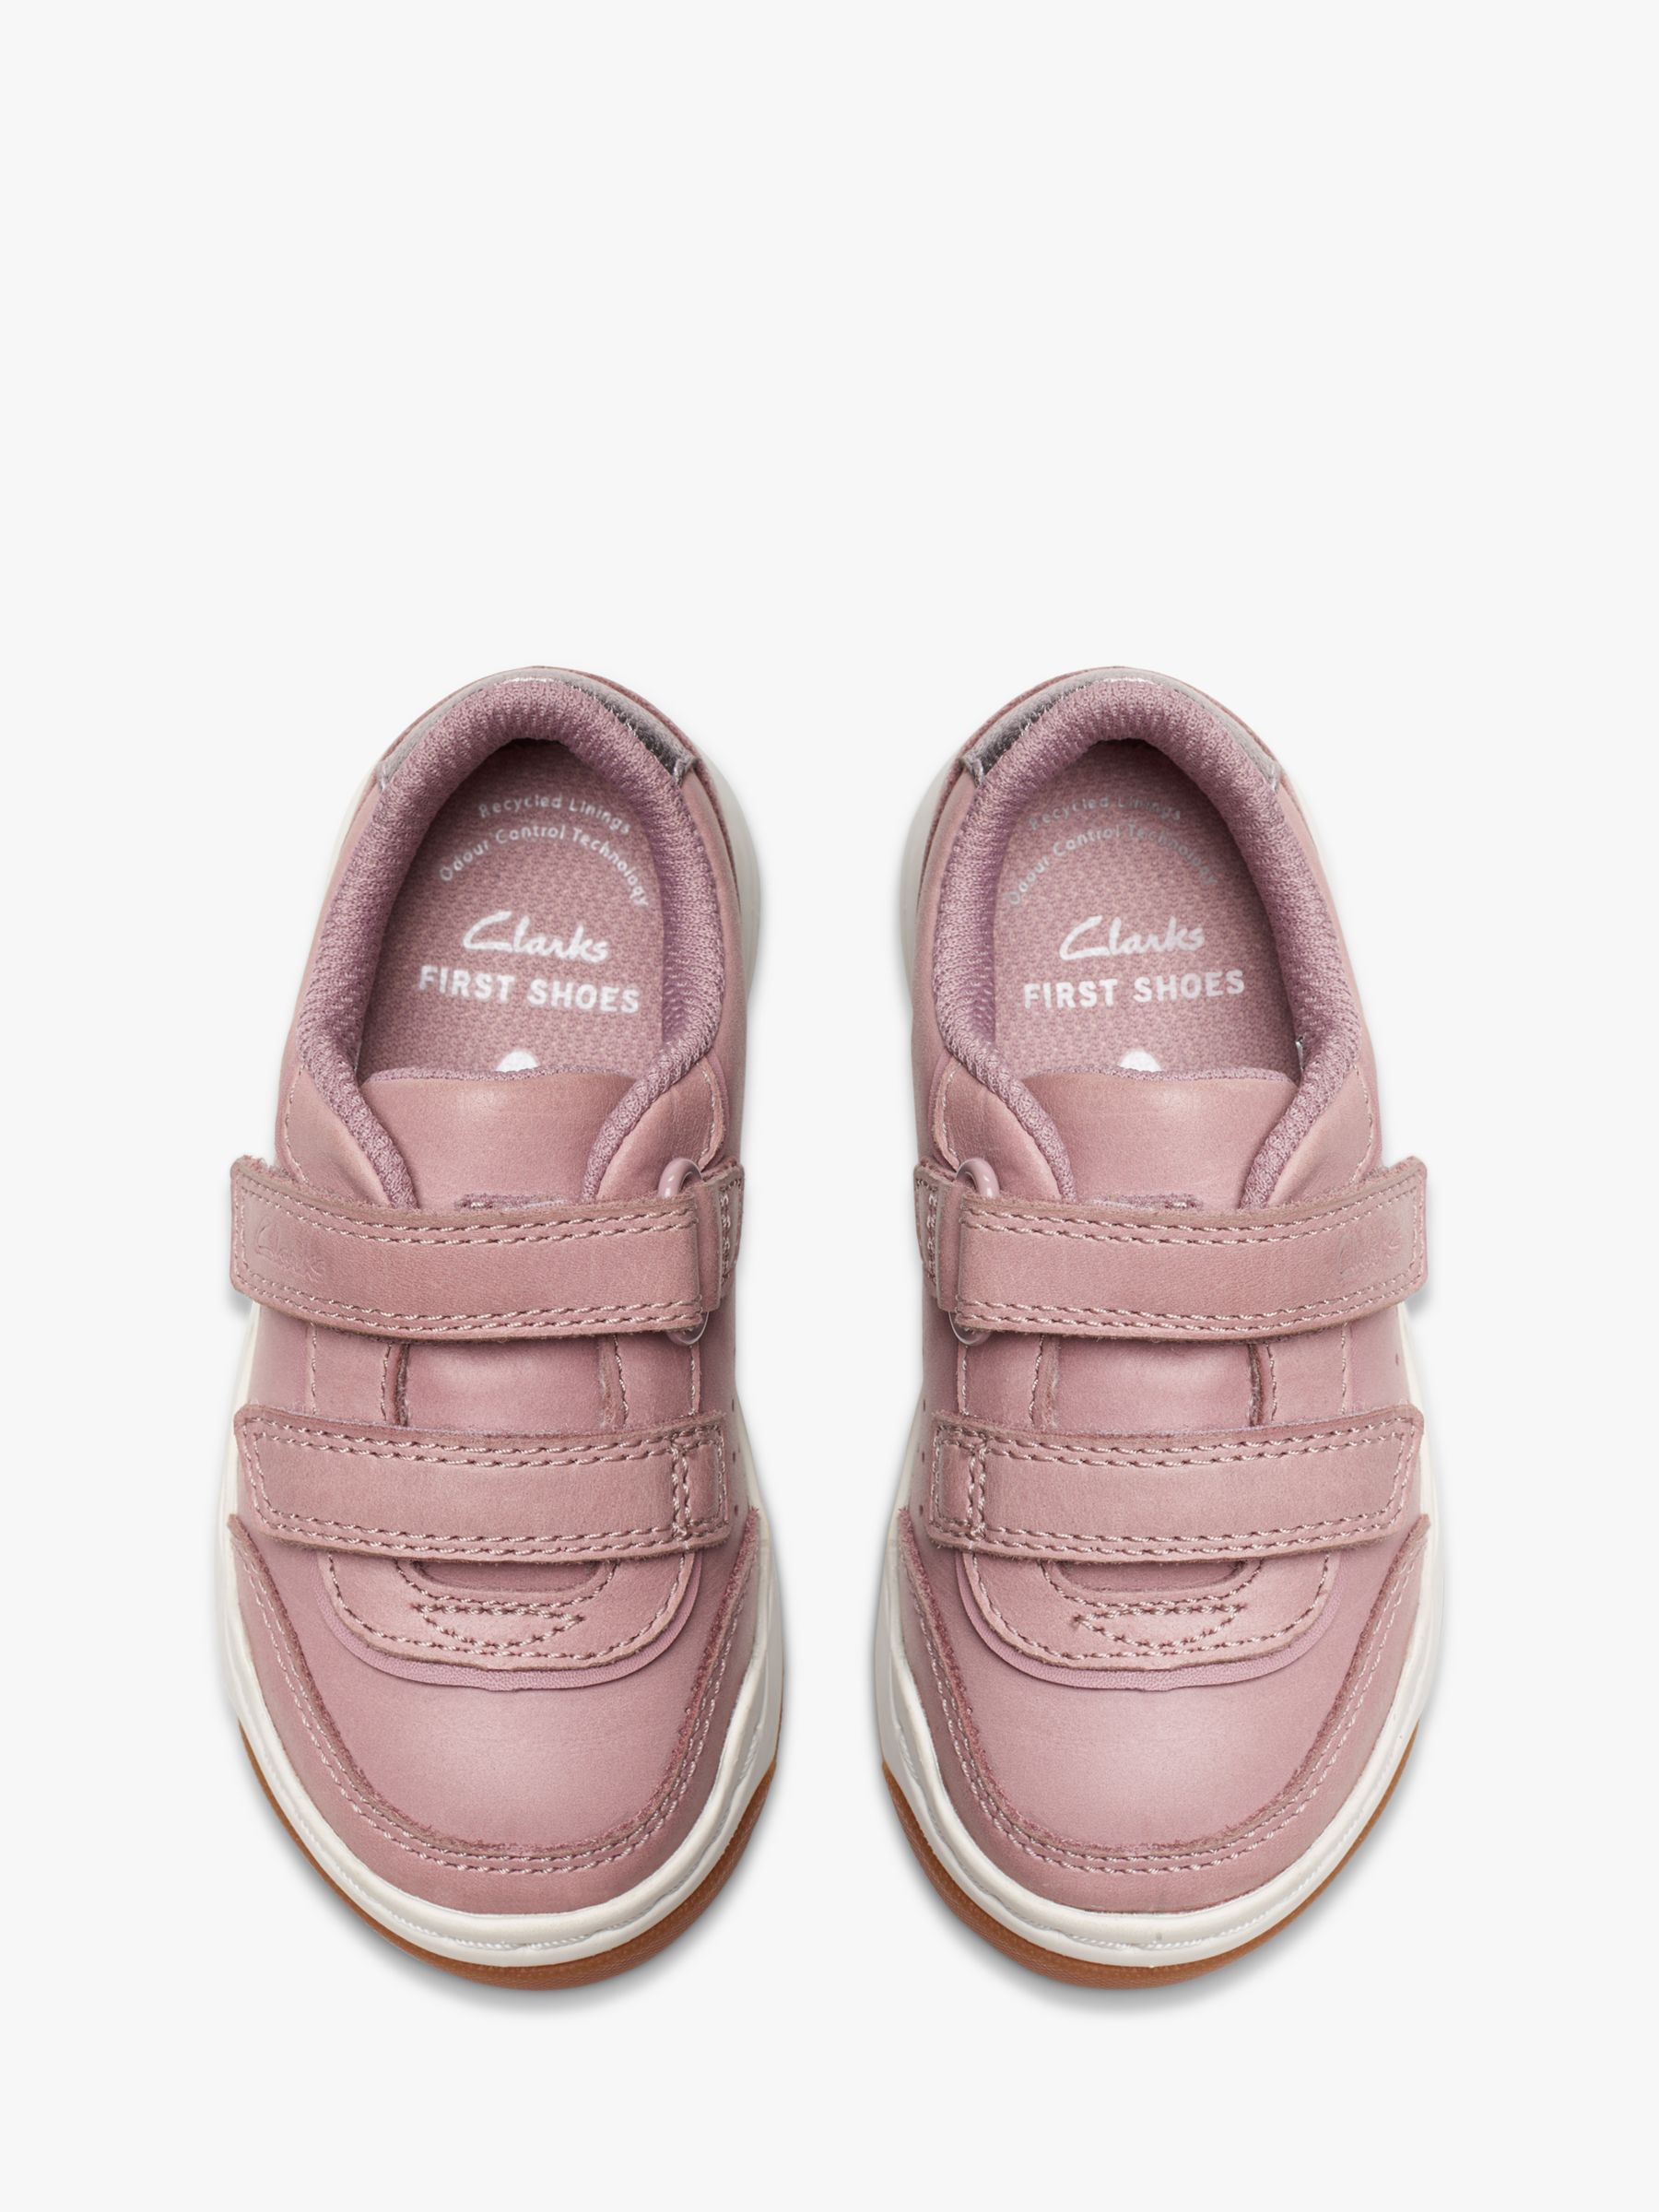 Clarks Kids' Urban Solo Leather Riptape Trainers, Dusty Pink, 4F Jnr